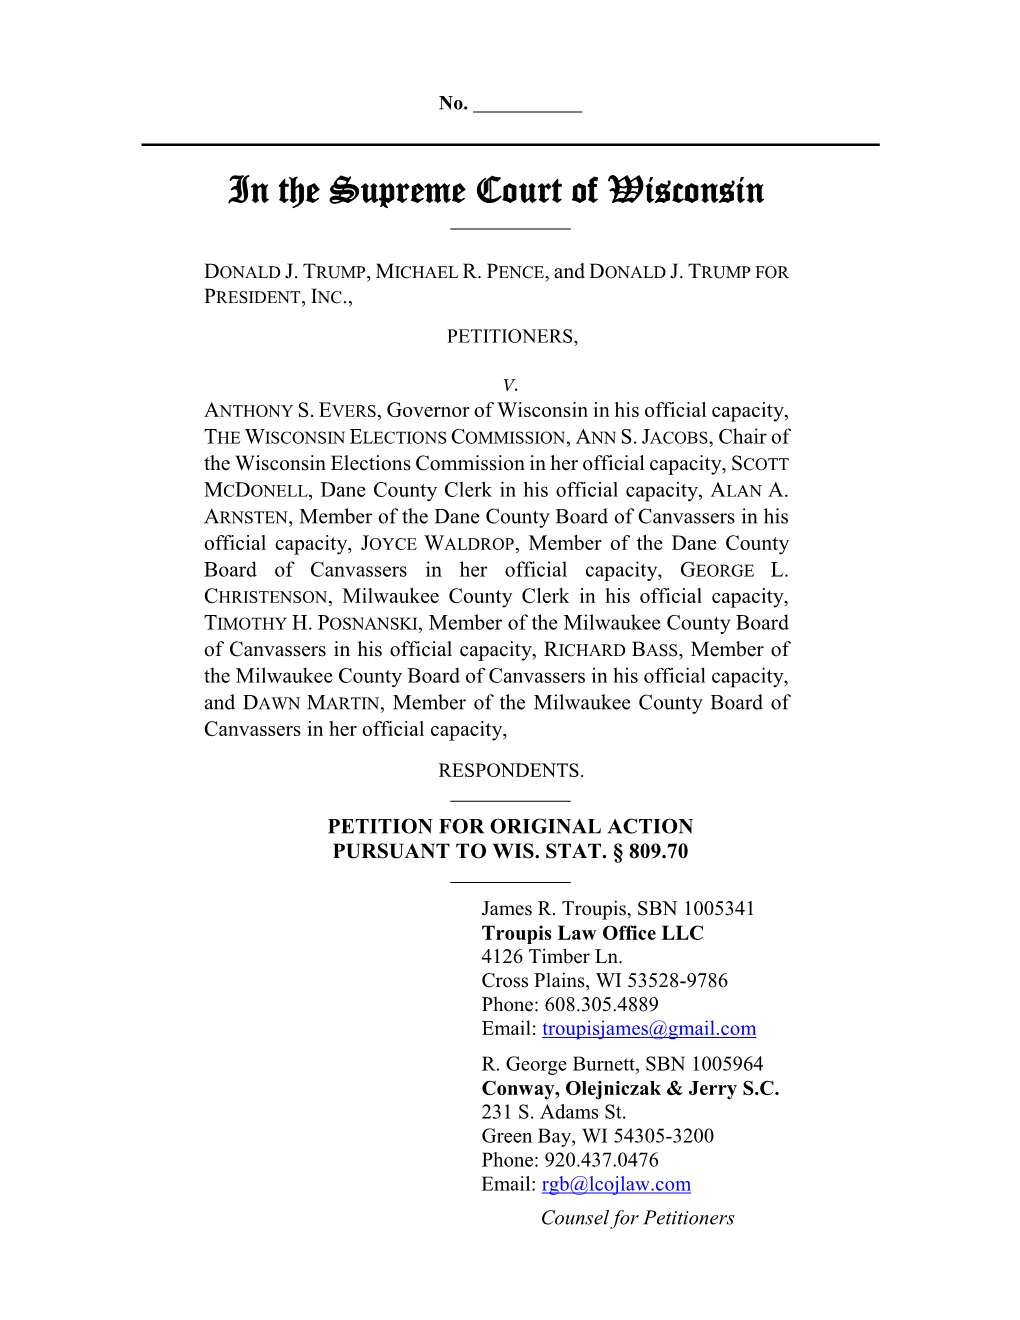 In the Supreme Court of Wisconsin